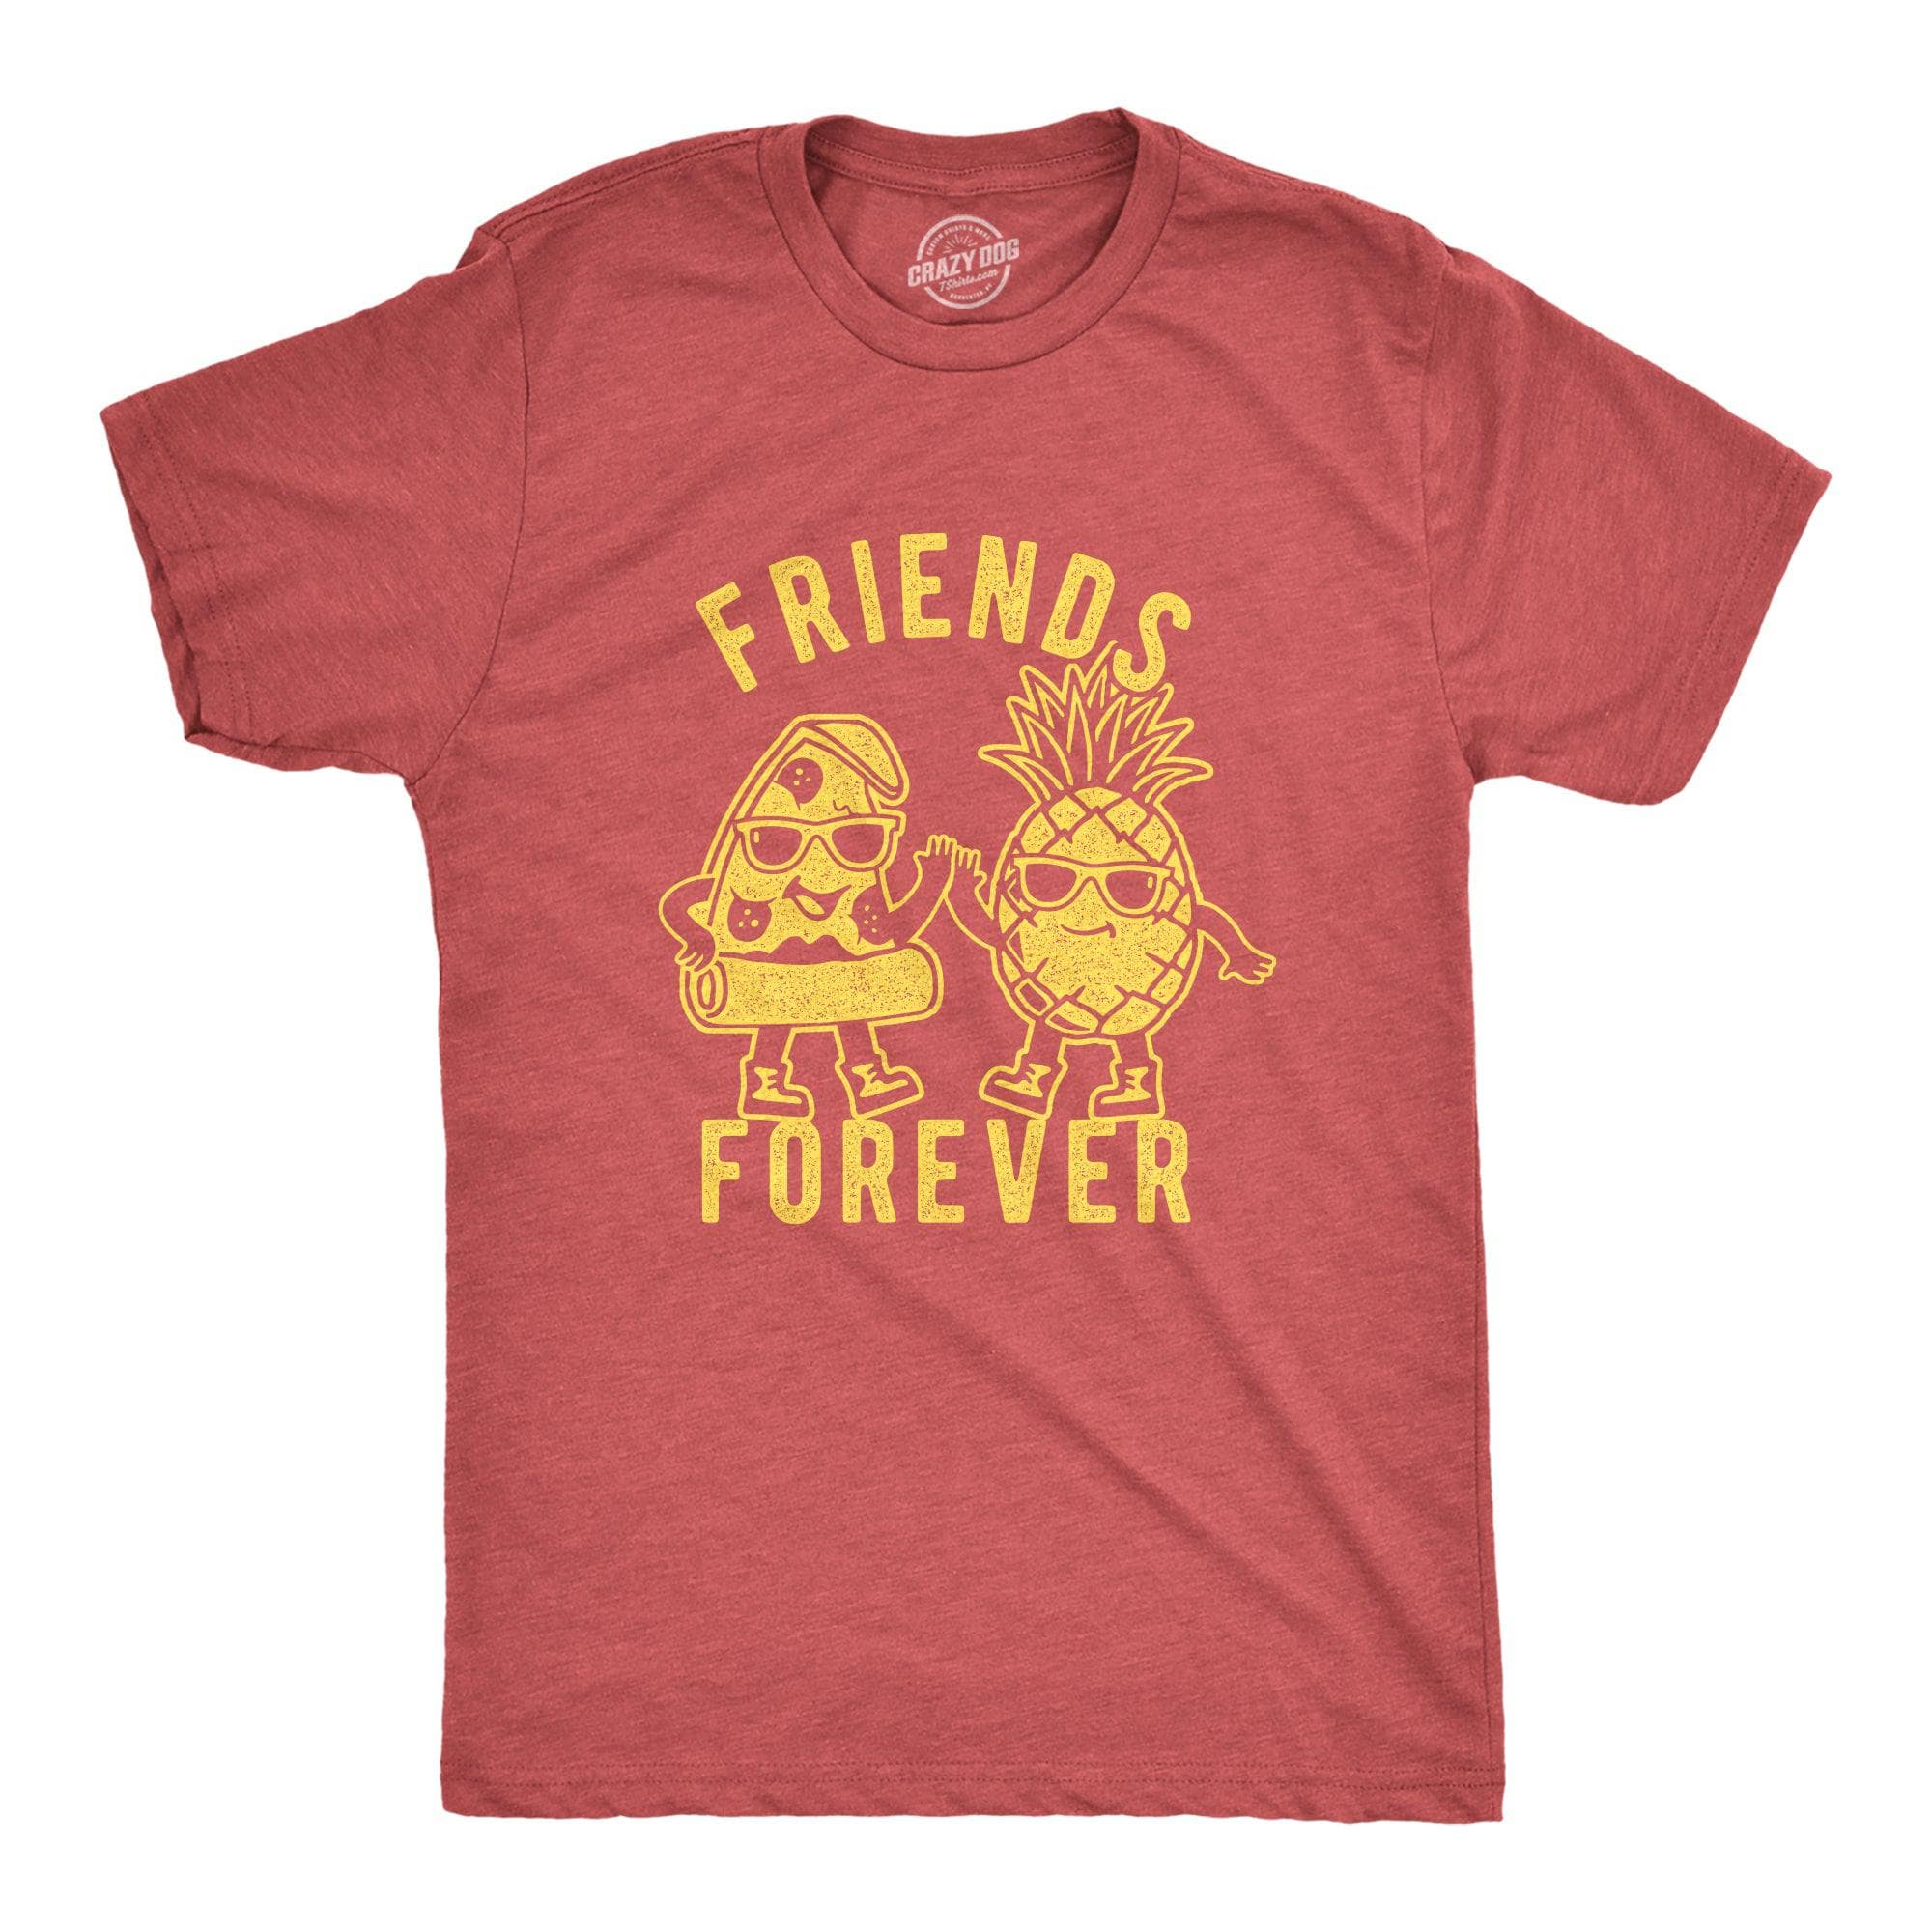 Friends Forever Pizza Pineapple Men's Tshirt  -  Crazy Dog T-Shirts